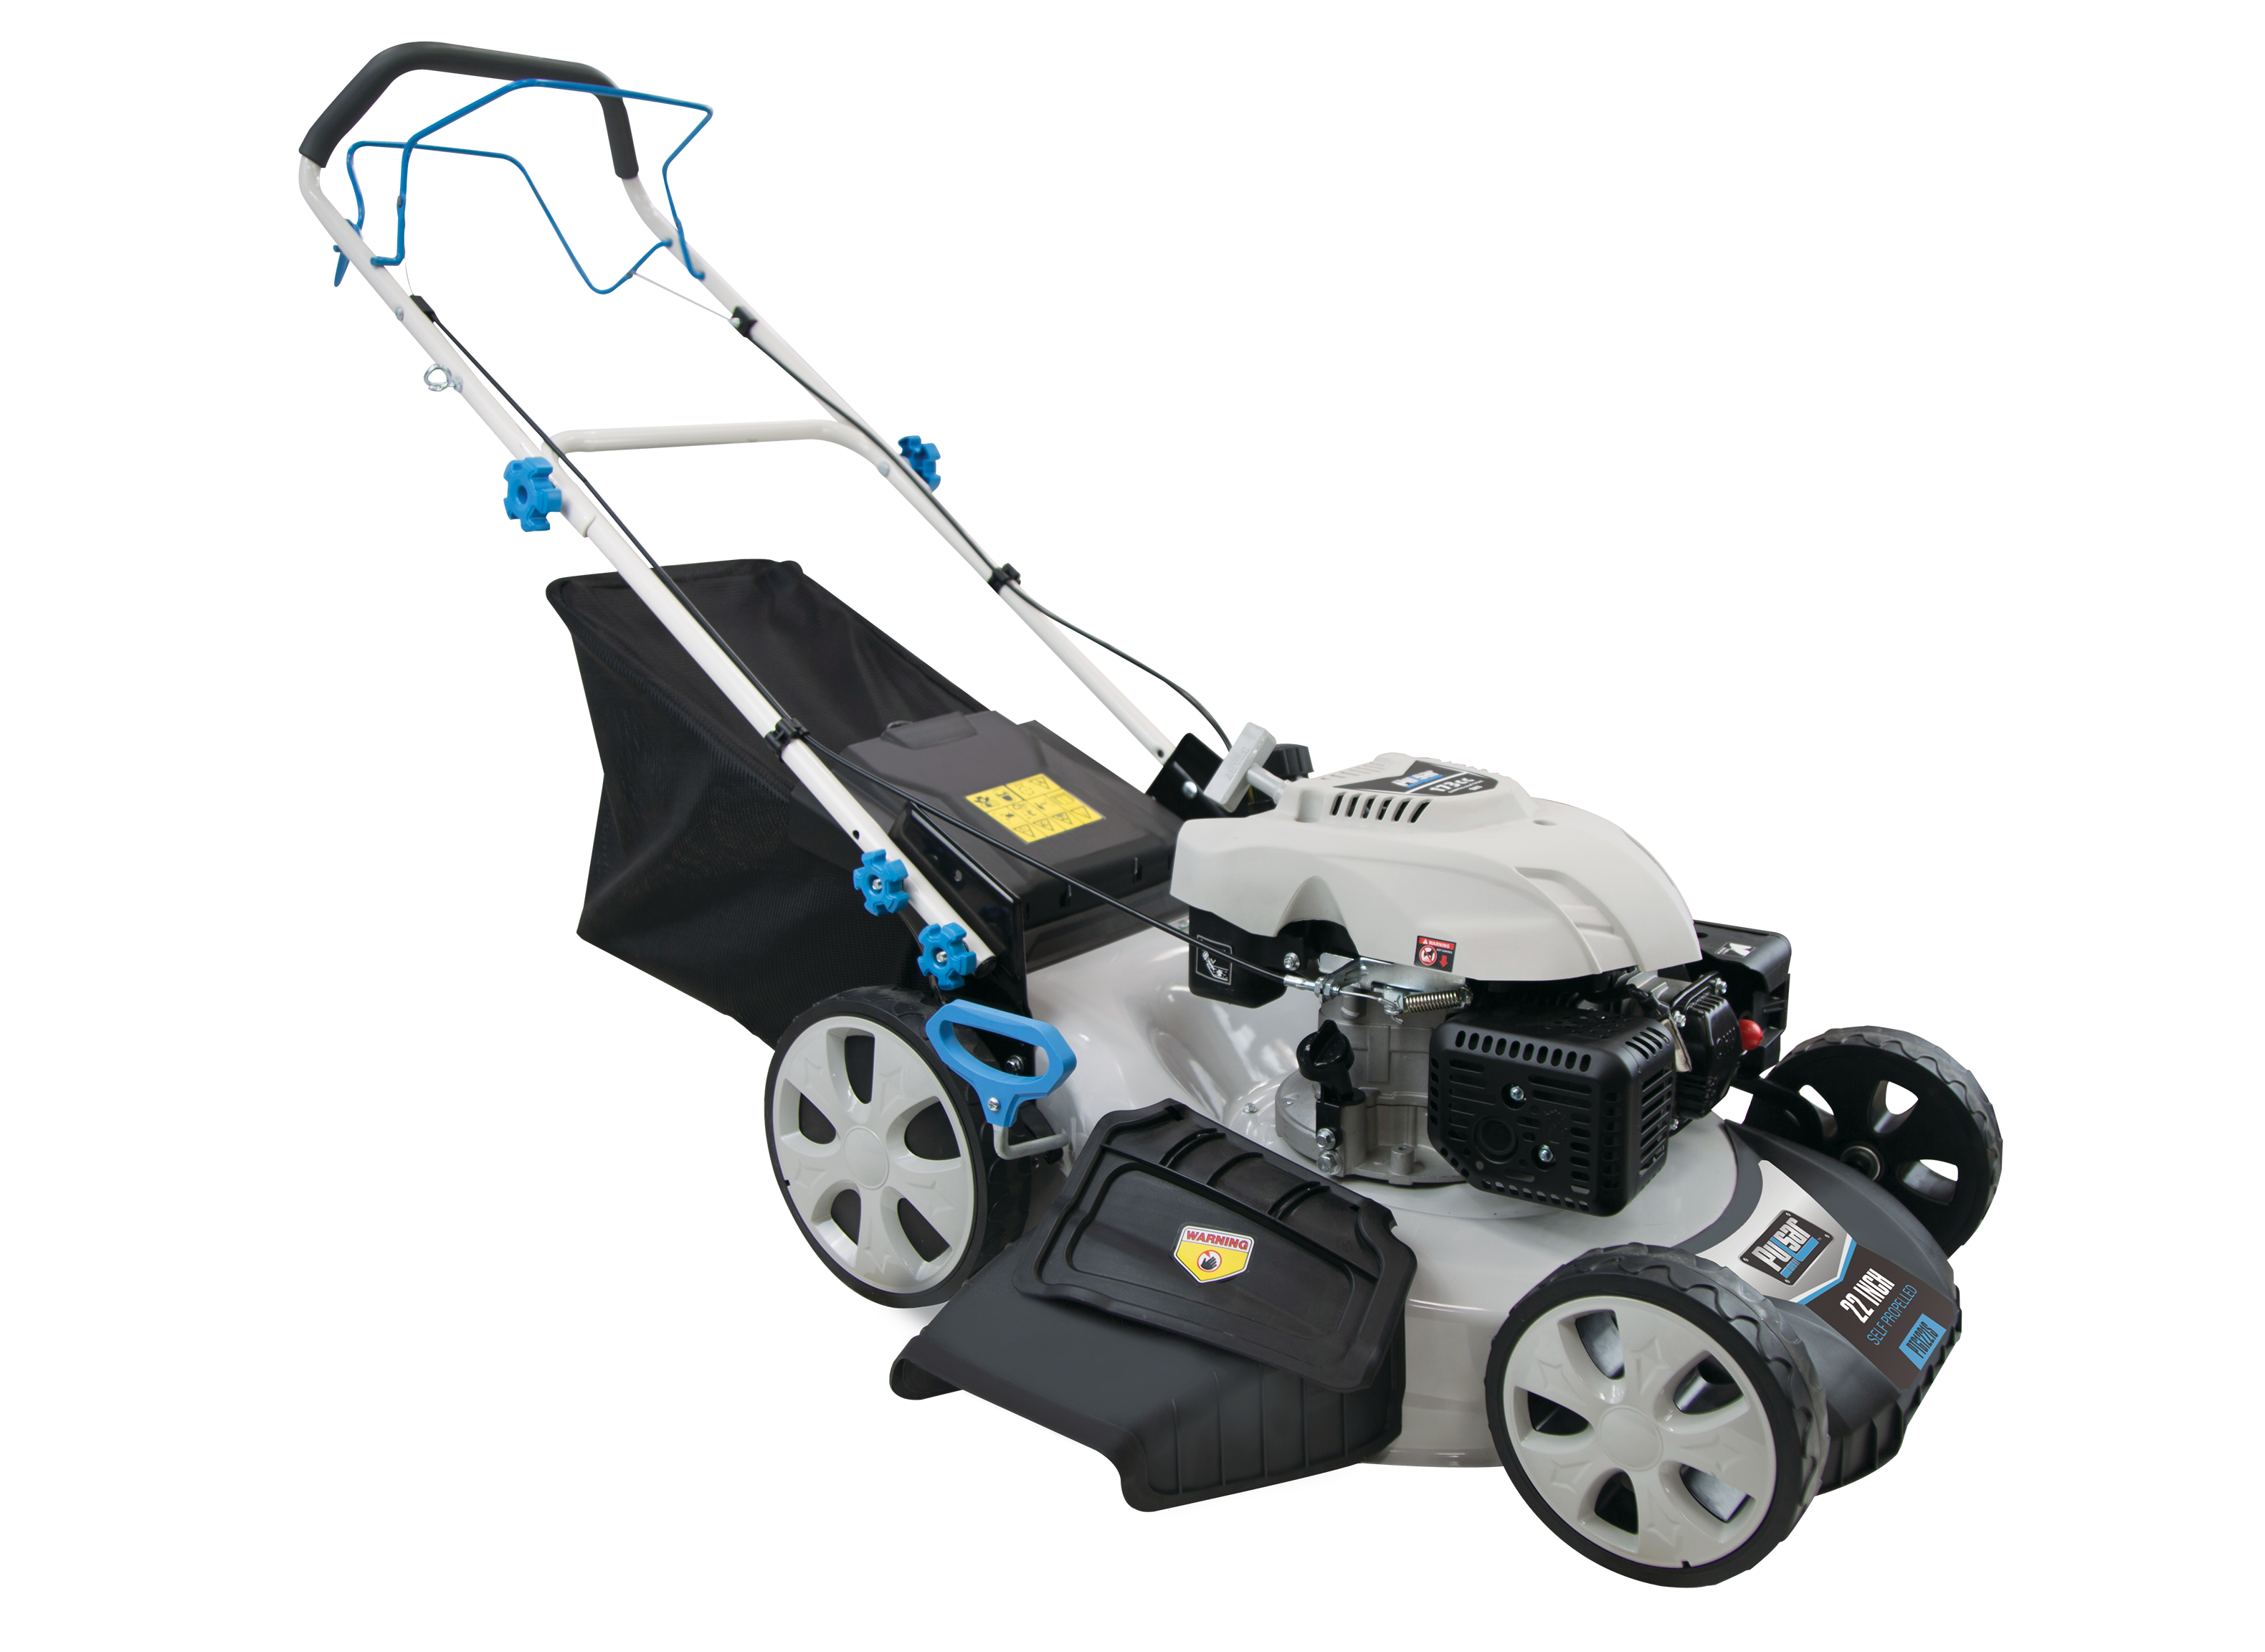 https://crdms.images.consumerreports.org/prod/products/cr/models/400487-gas-self-propelled-mowers-pulsar-ptg1221s-10010556.png